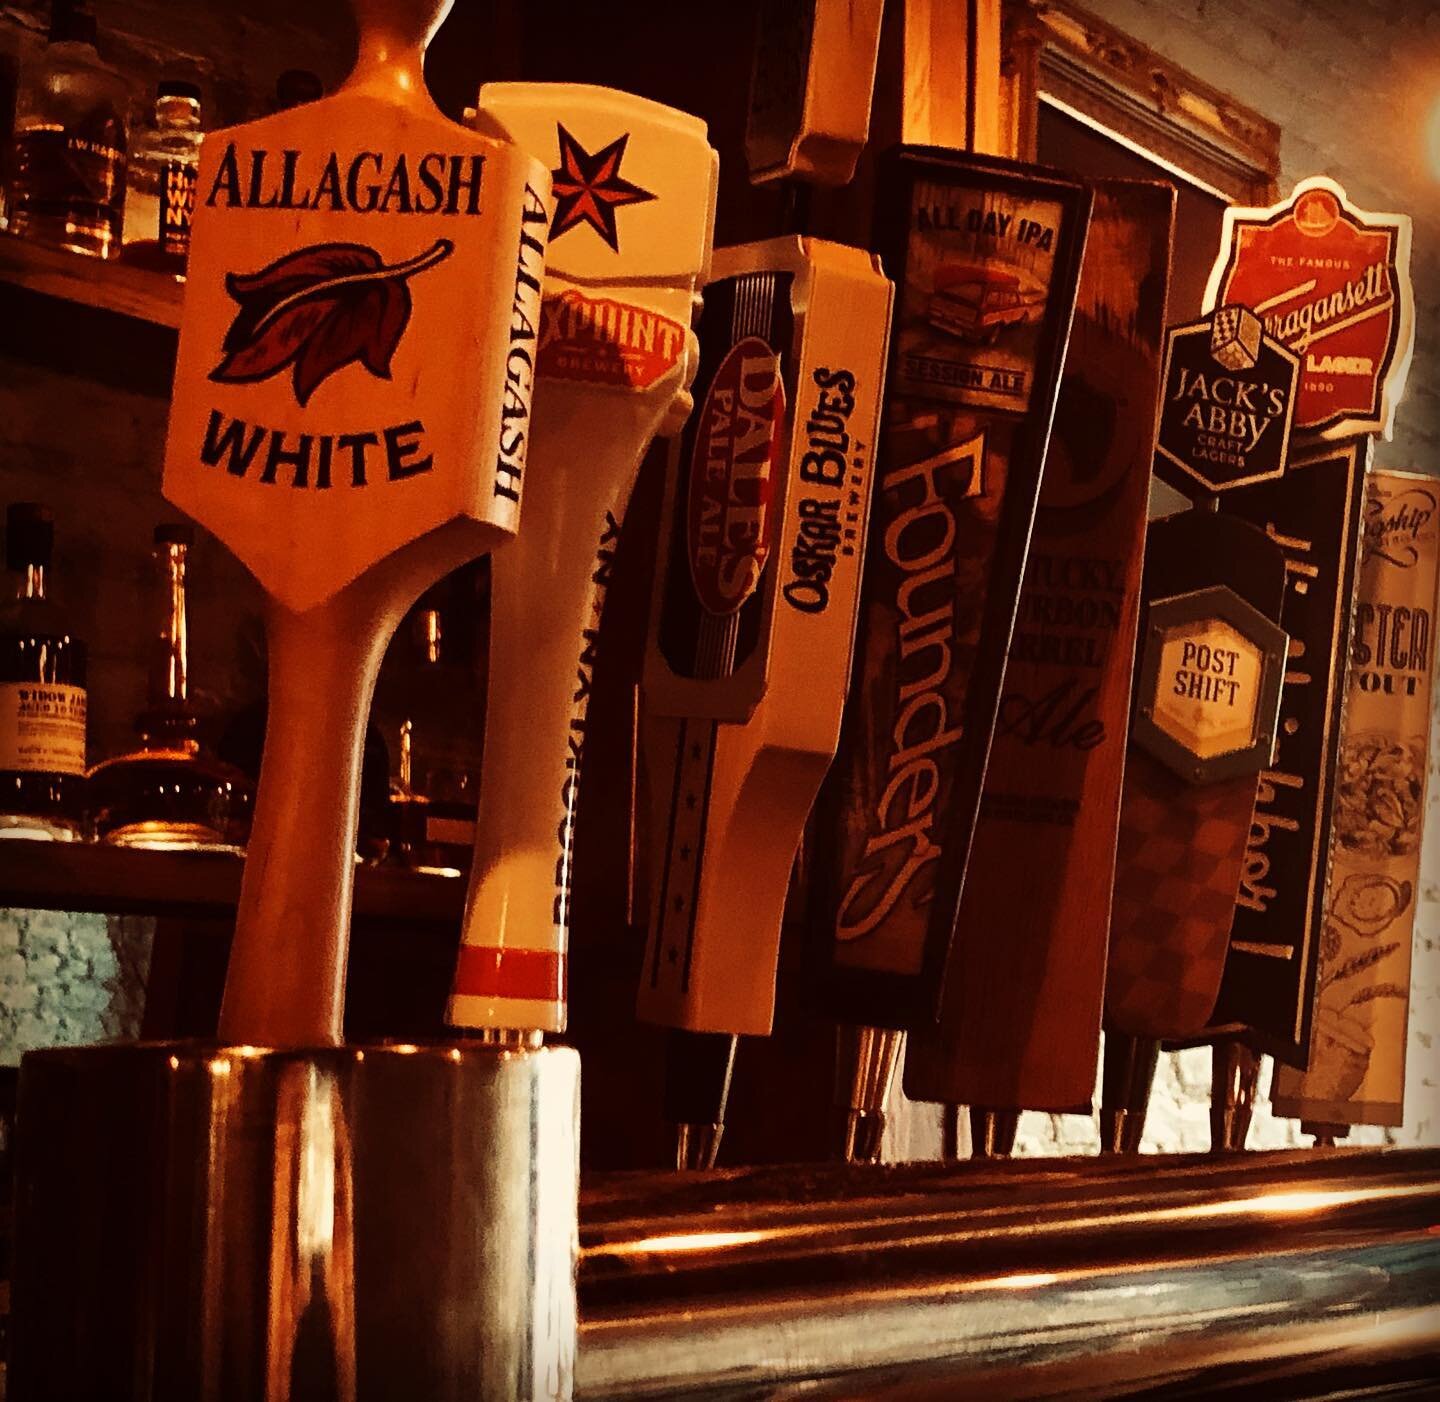 8 tasty beers on tap. Get a $5 Narragansett Lager or a $6 Founders All Day during happy hour ( 4pm-7pm everyday ). #beer #tapbeer #happyhour #whiskey #whisky #bar #nyc #uws #morningsideheights #columbia